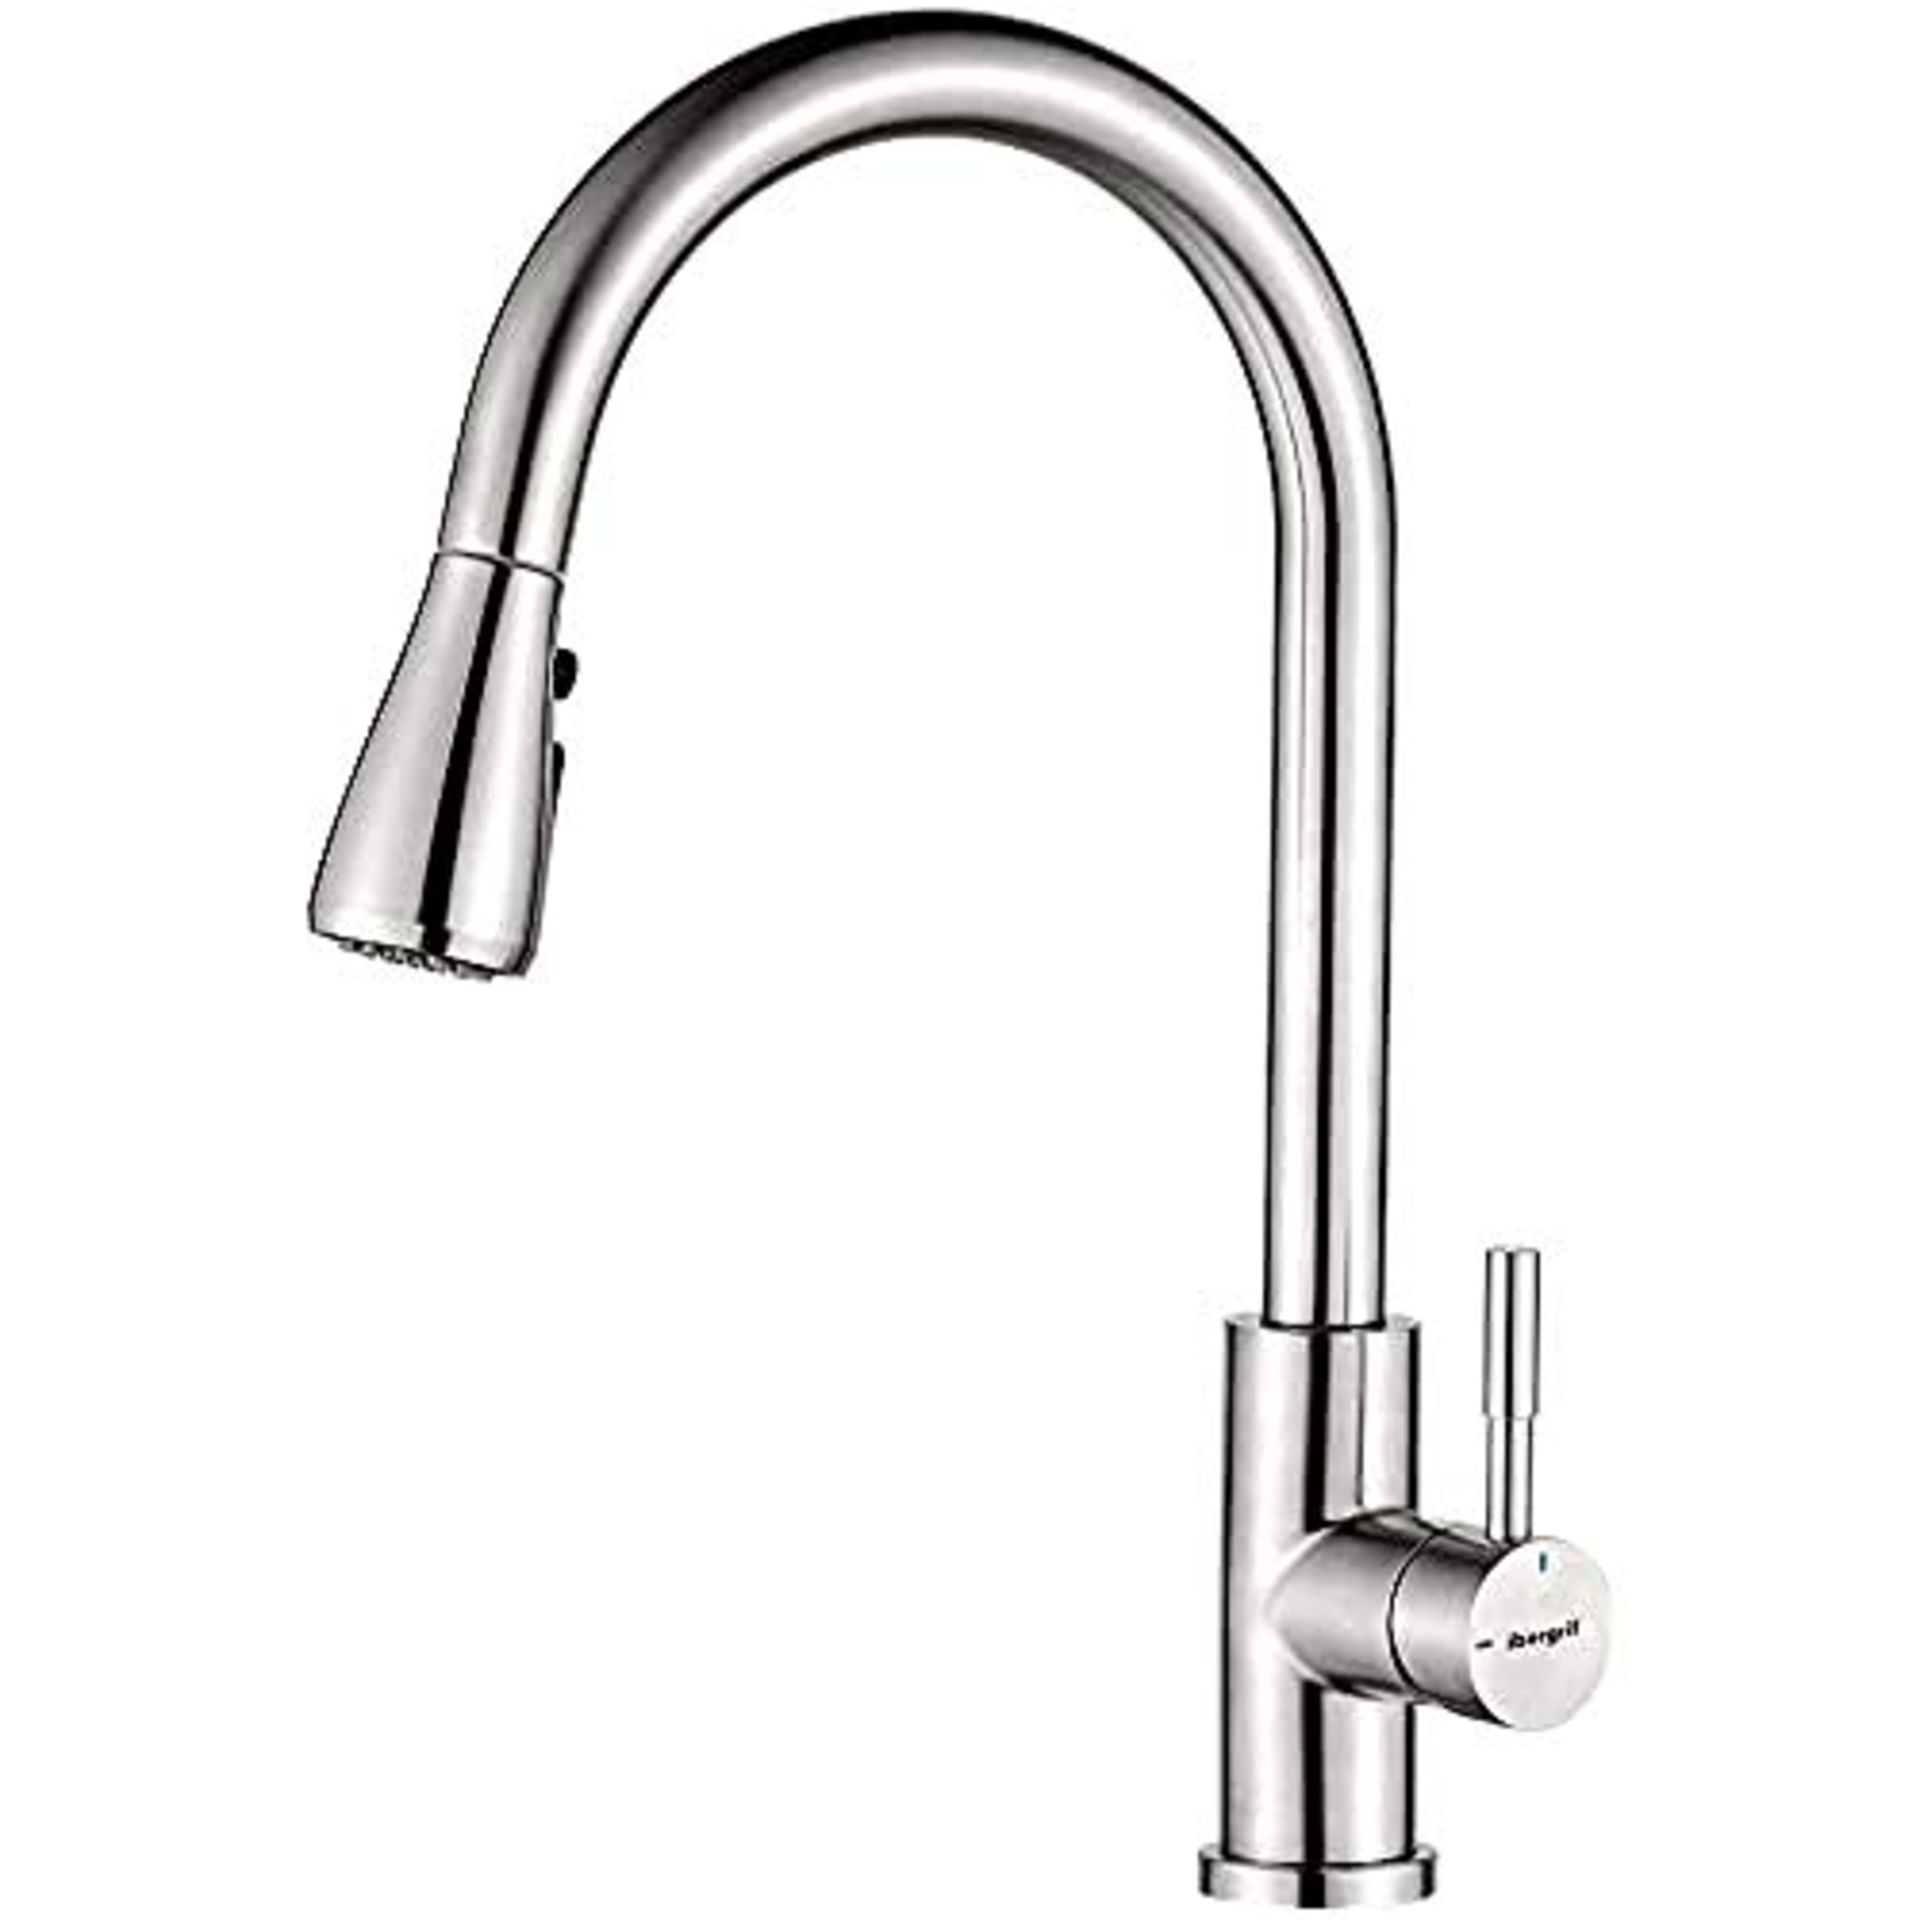 Ibergrif M22137 Kitchen Sink Taps Mixer with Pull Out Spray, High Arc with Dual Spray